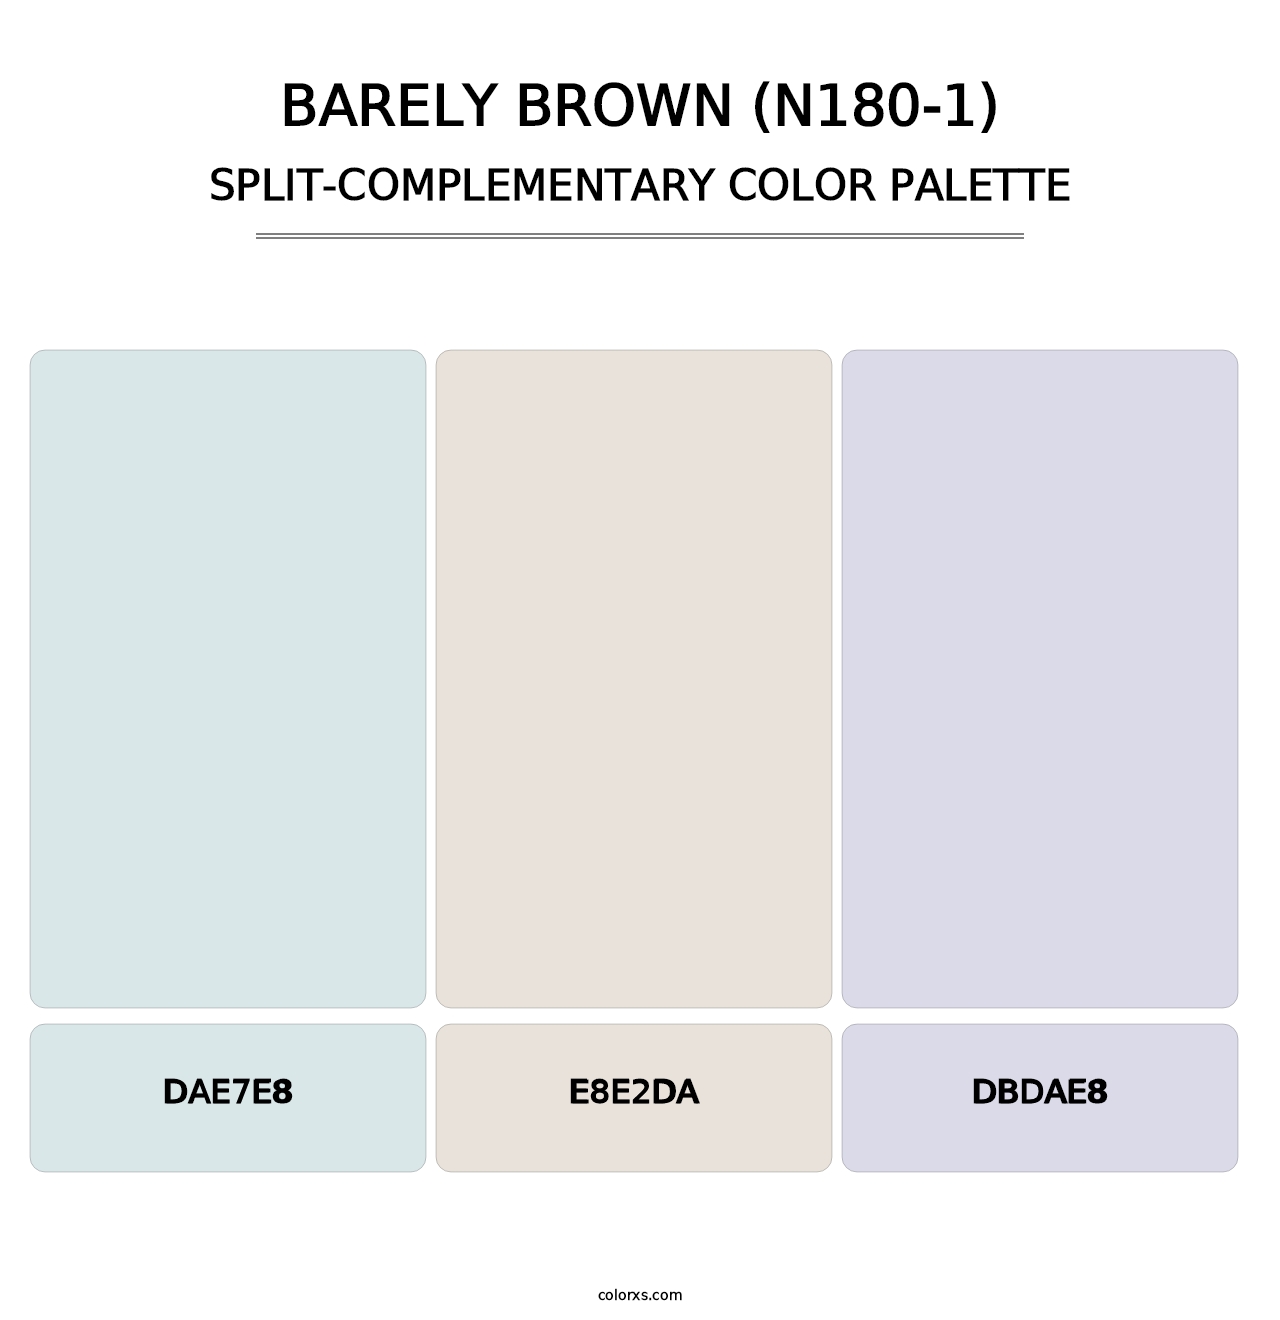 Barely Brown (N180-1) - Split-Complementary Color Palette